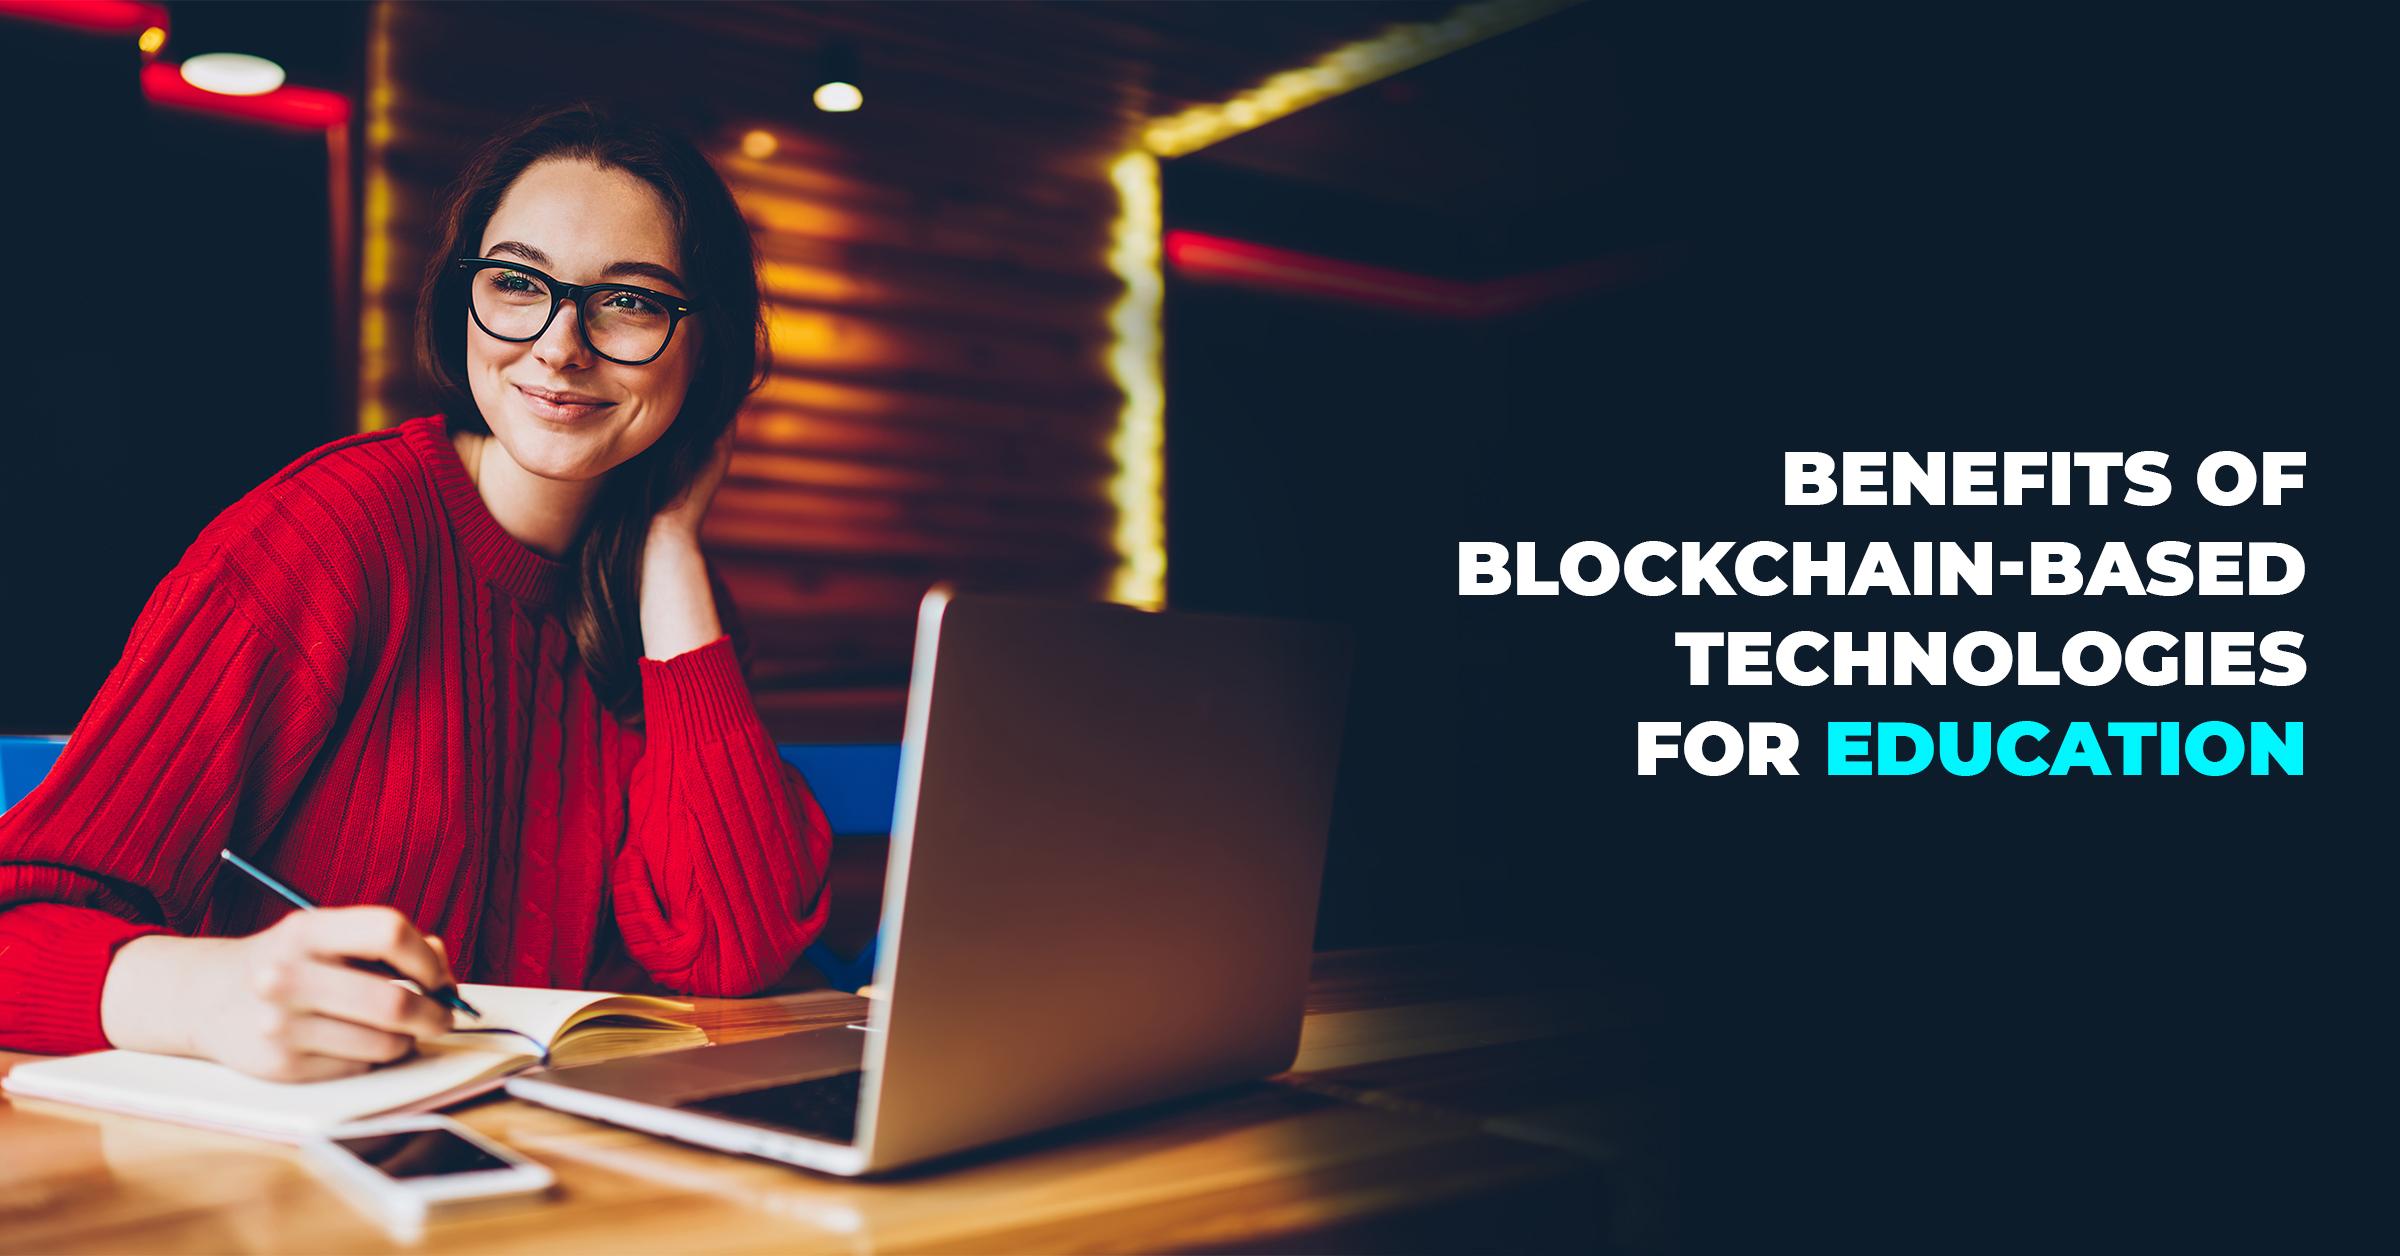 Benefits of Blockchain-Based Technologies for Education